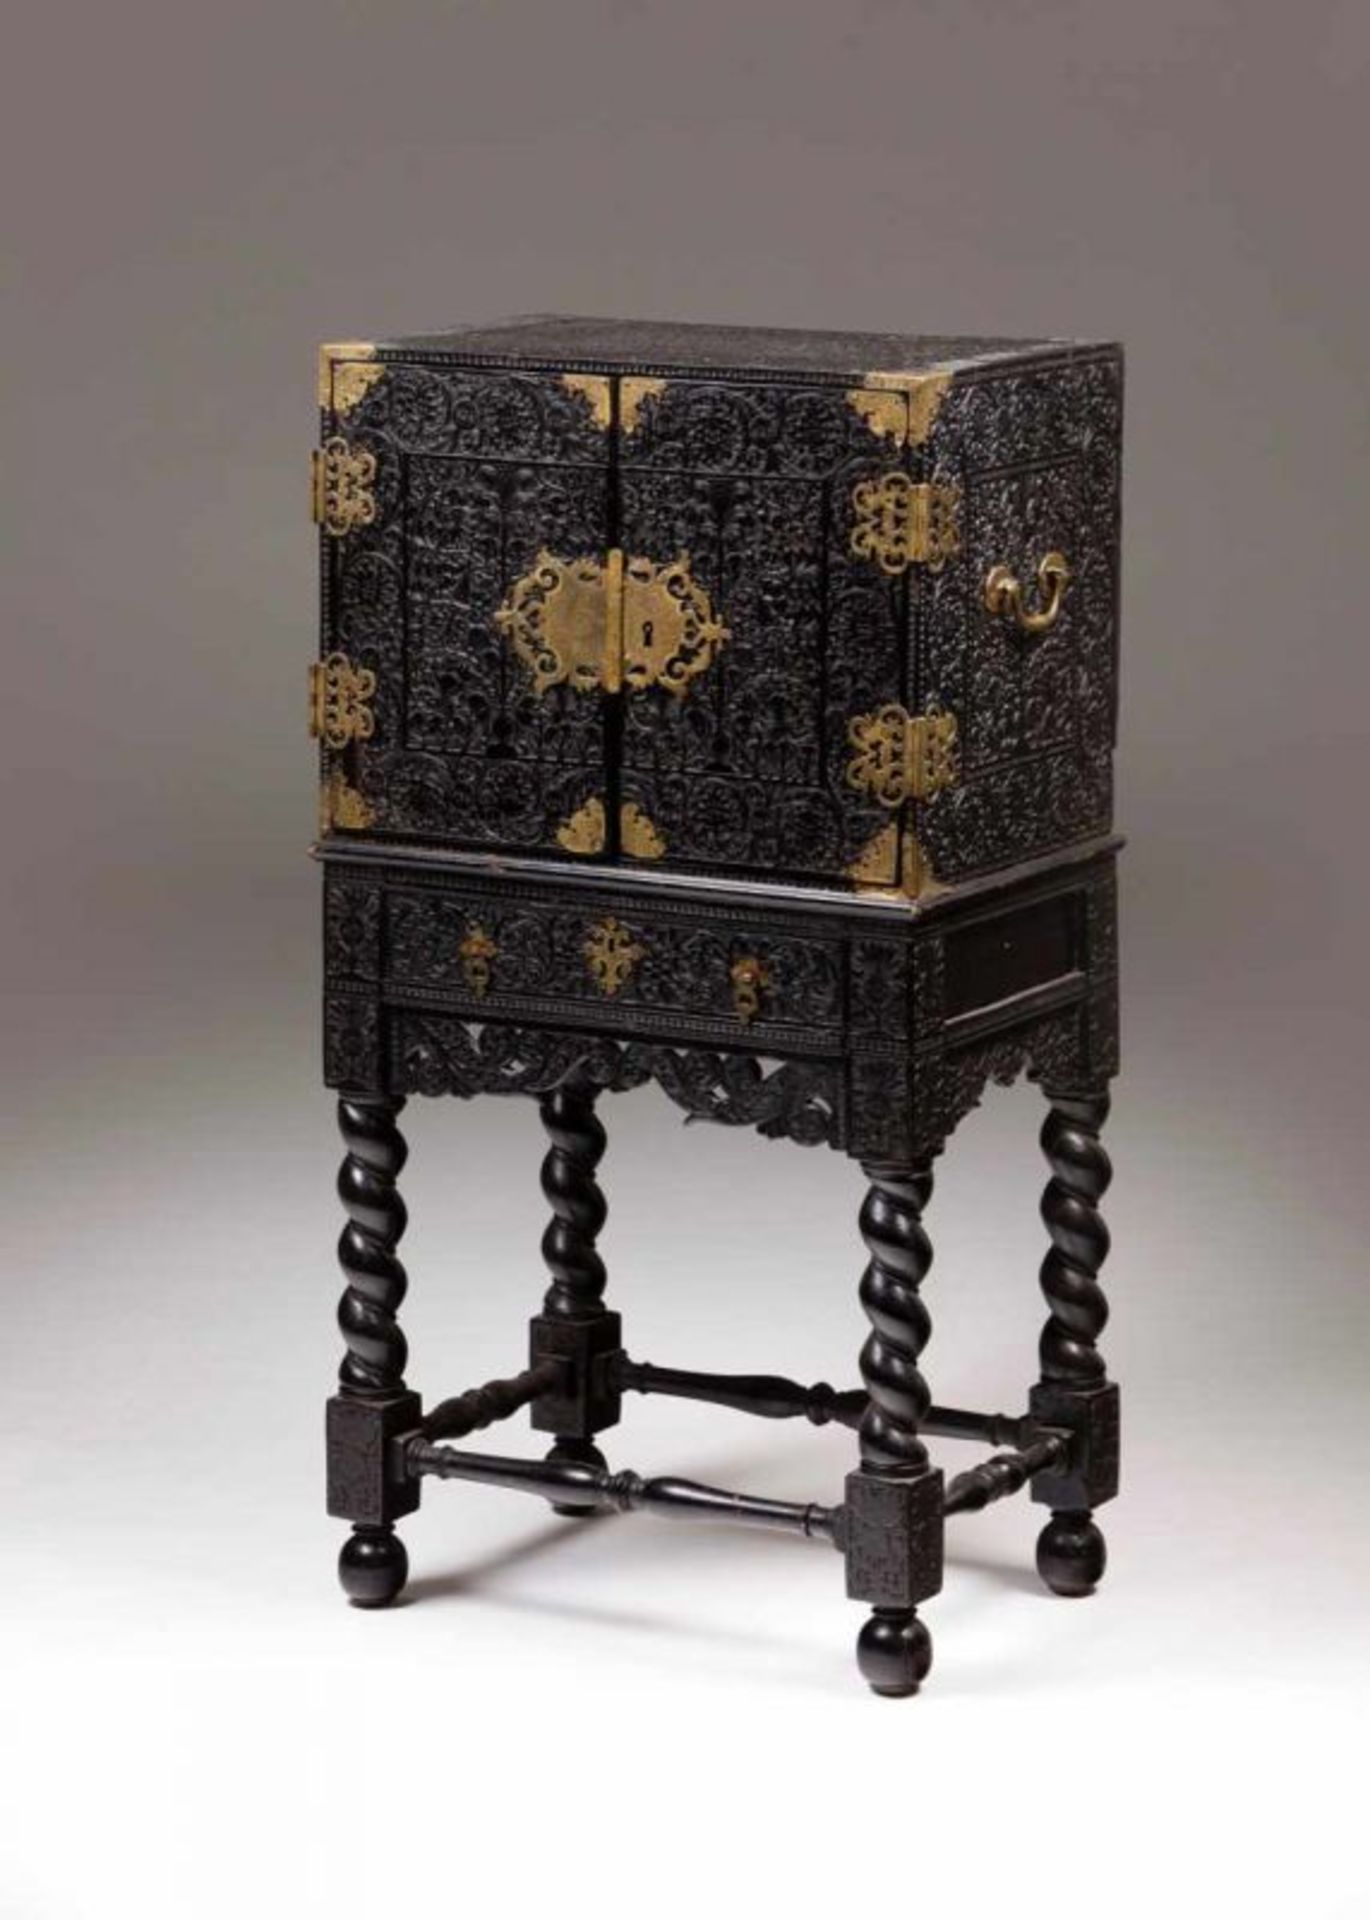 A Cingalo-Portuguese cabinet Carved ebony depicting Tree of Life and other floral motifs Upper part